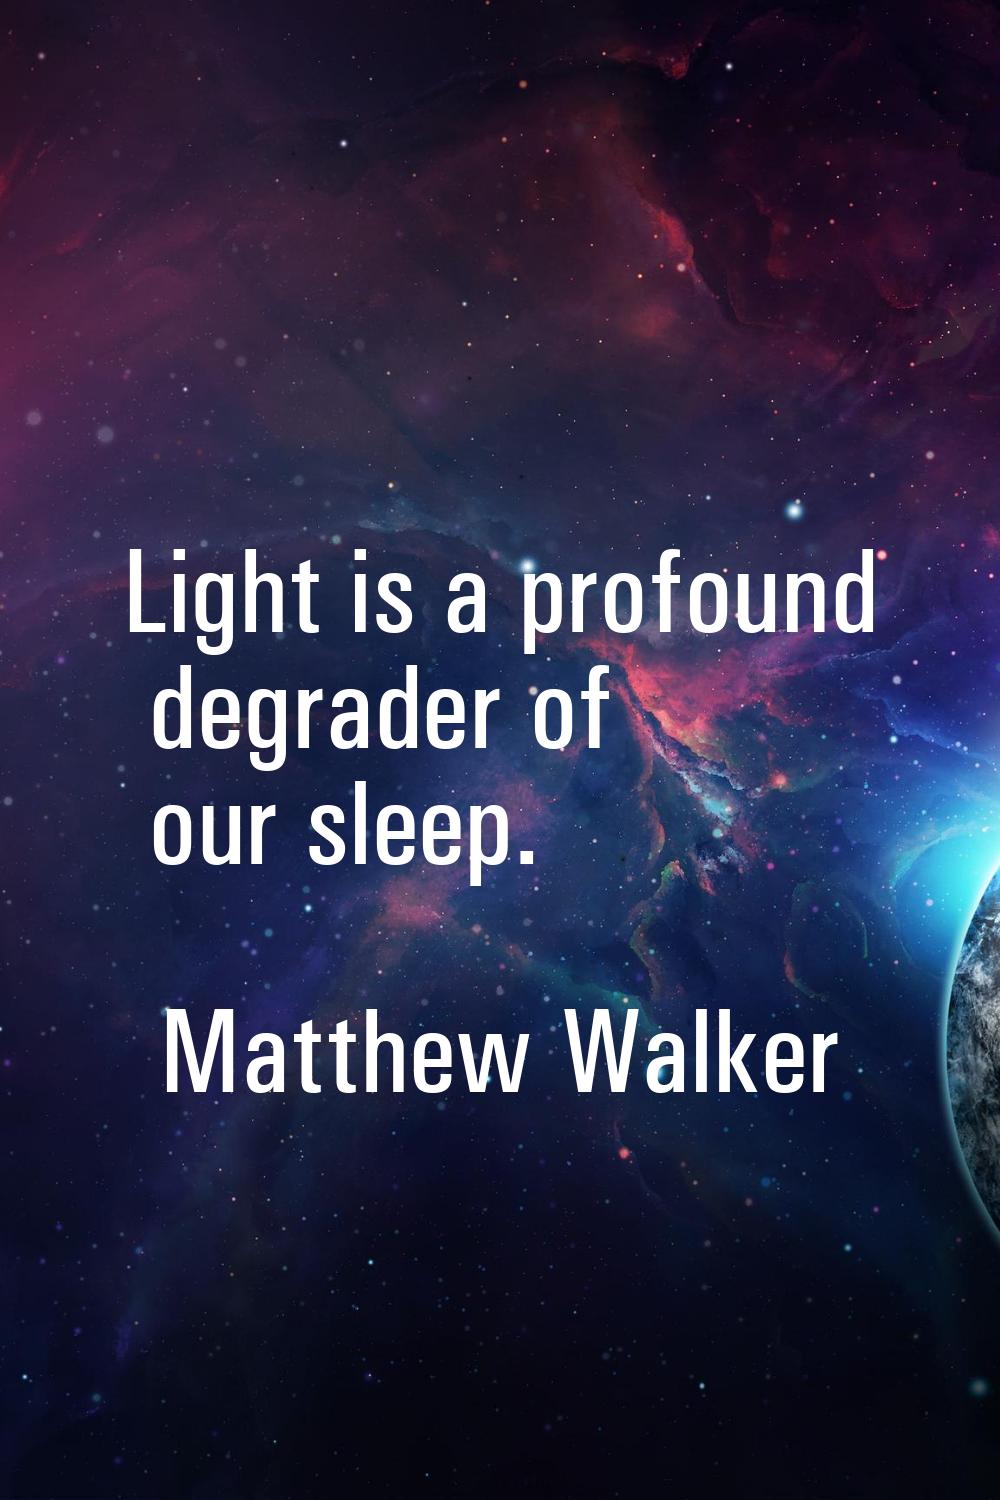 Light is a profound degrader of our sleep.